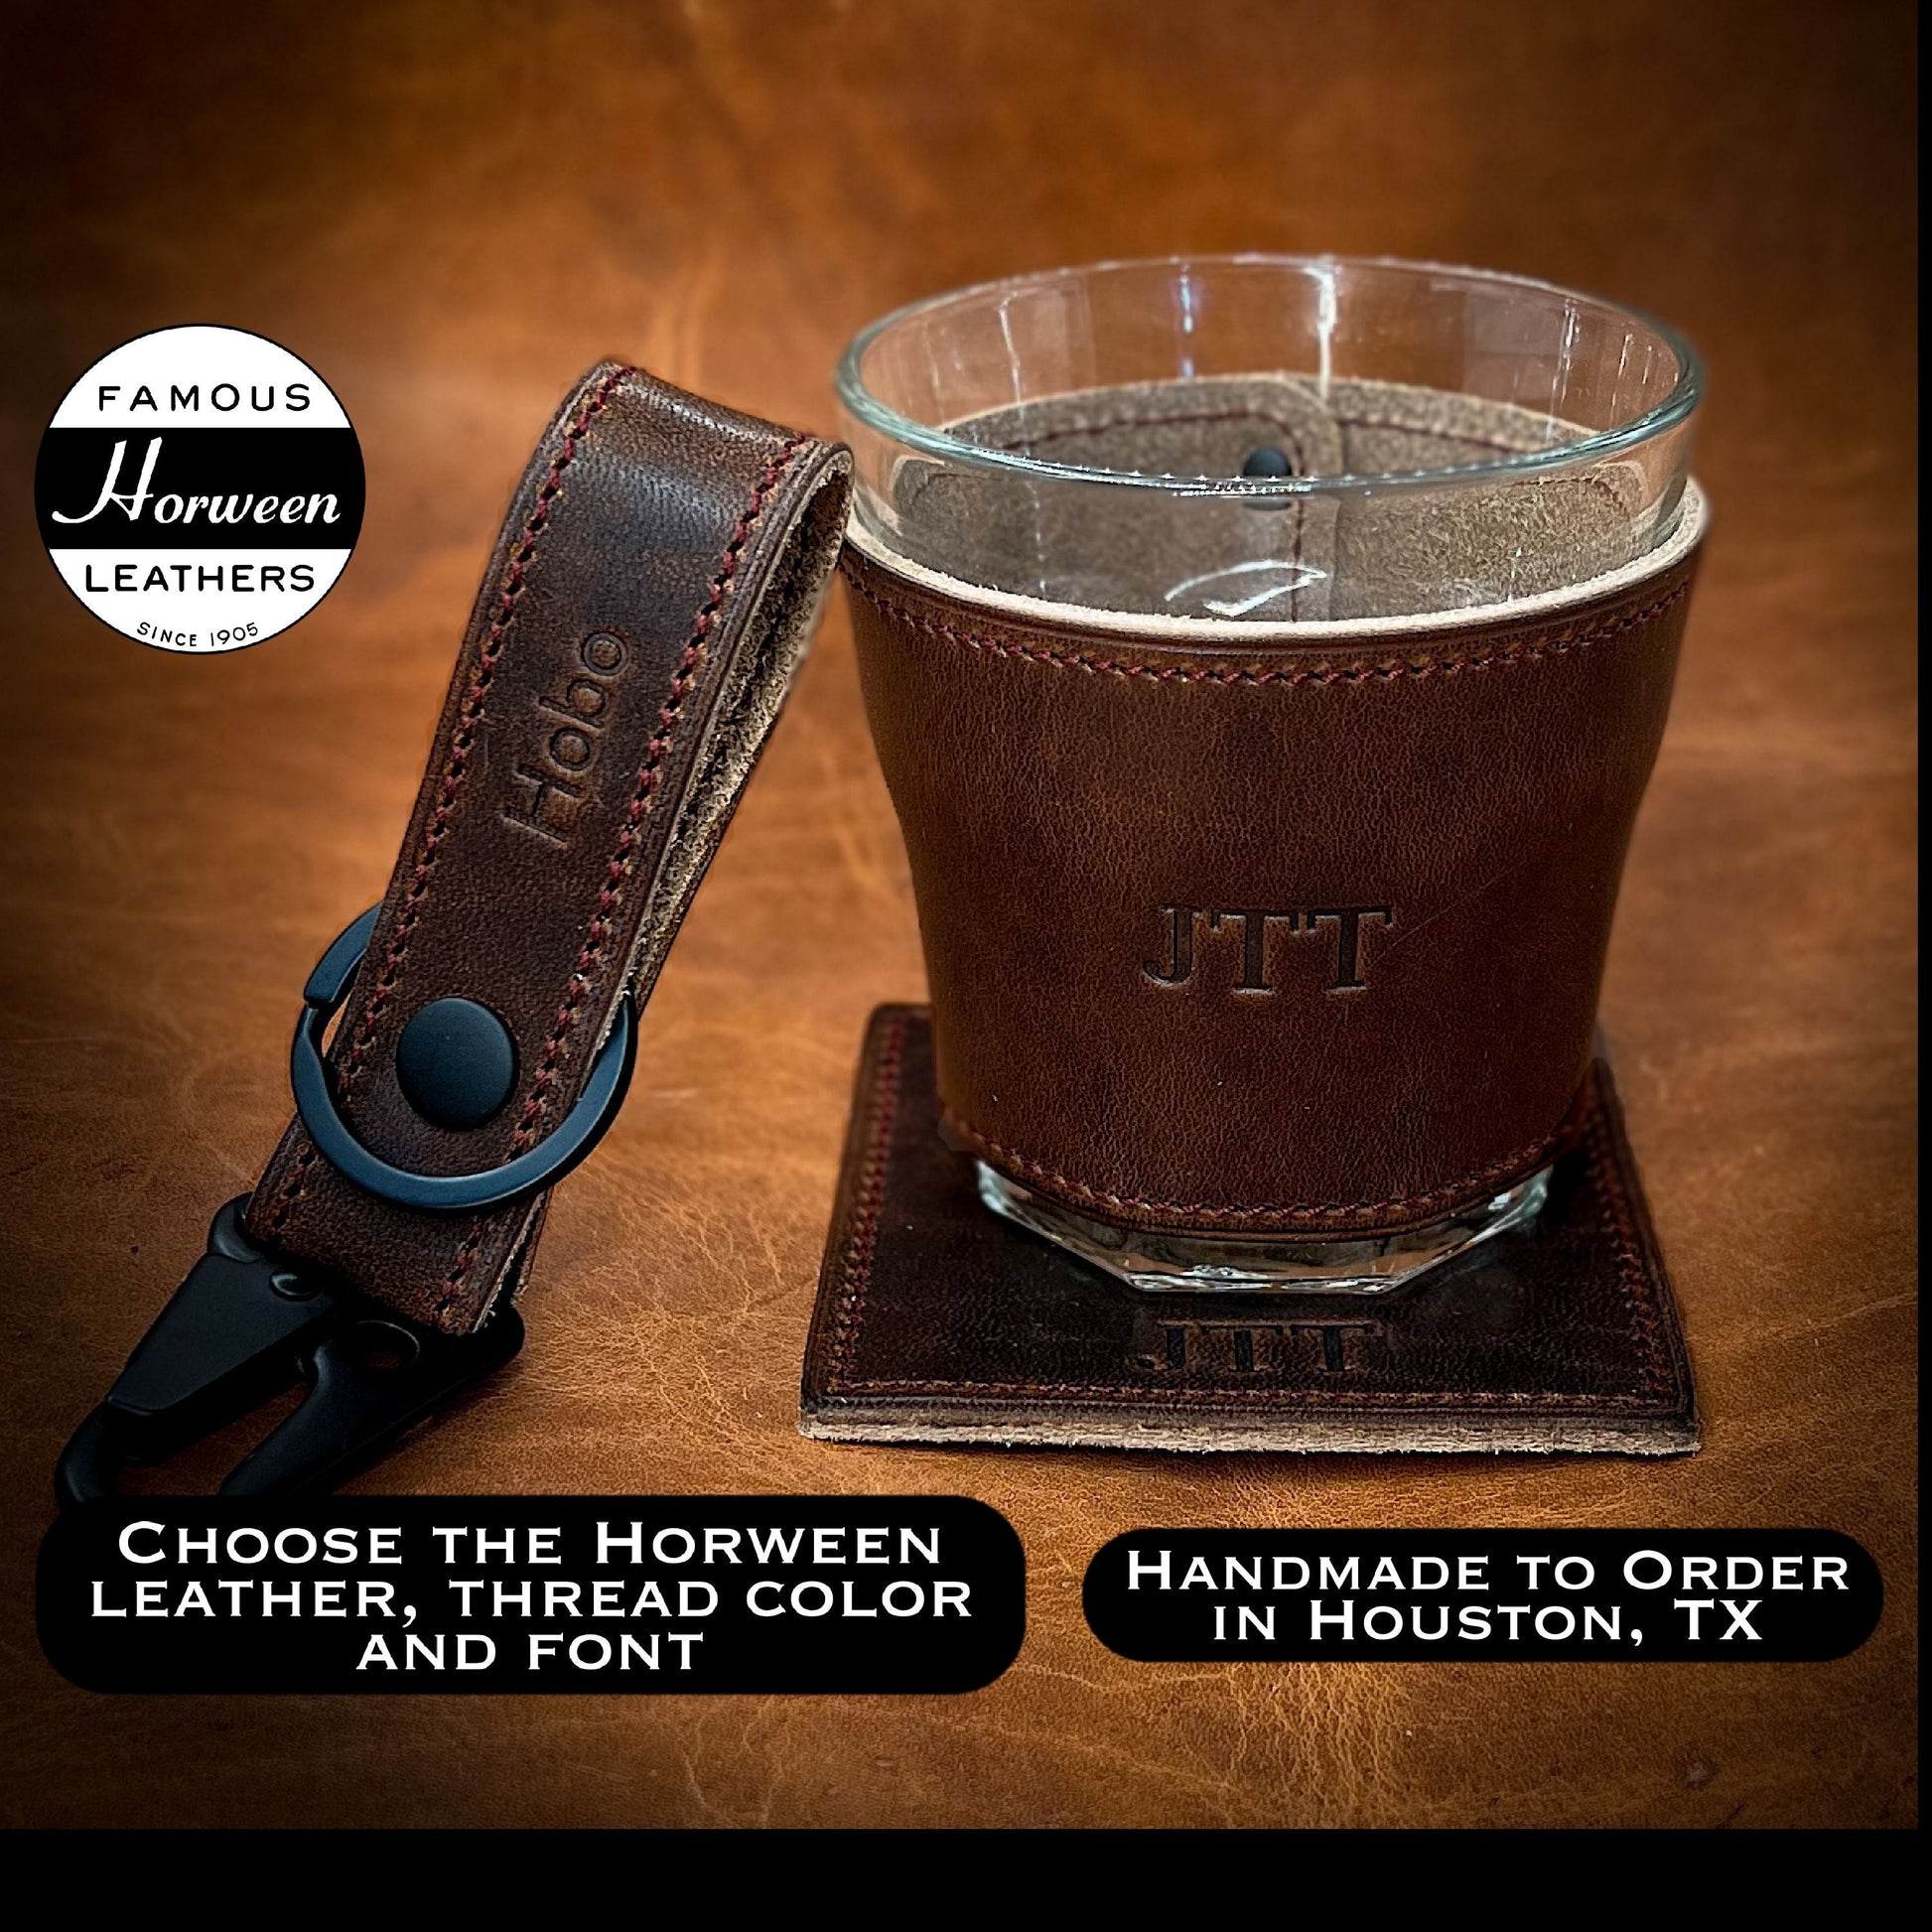 Personalized Tumbler Glasses in Horween leather. Handmade to Order by Custom Leather and Pen in Houston, TX